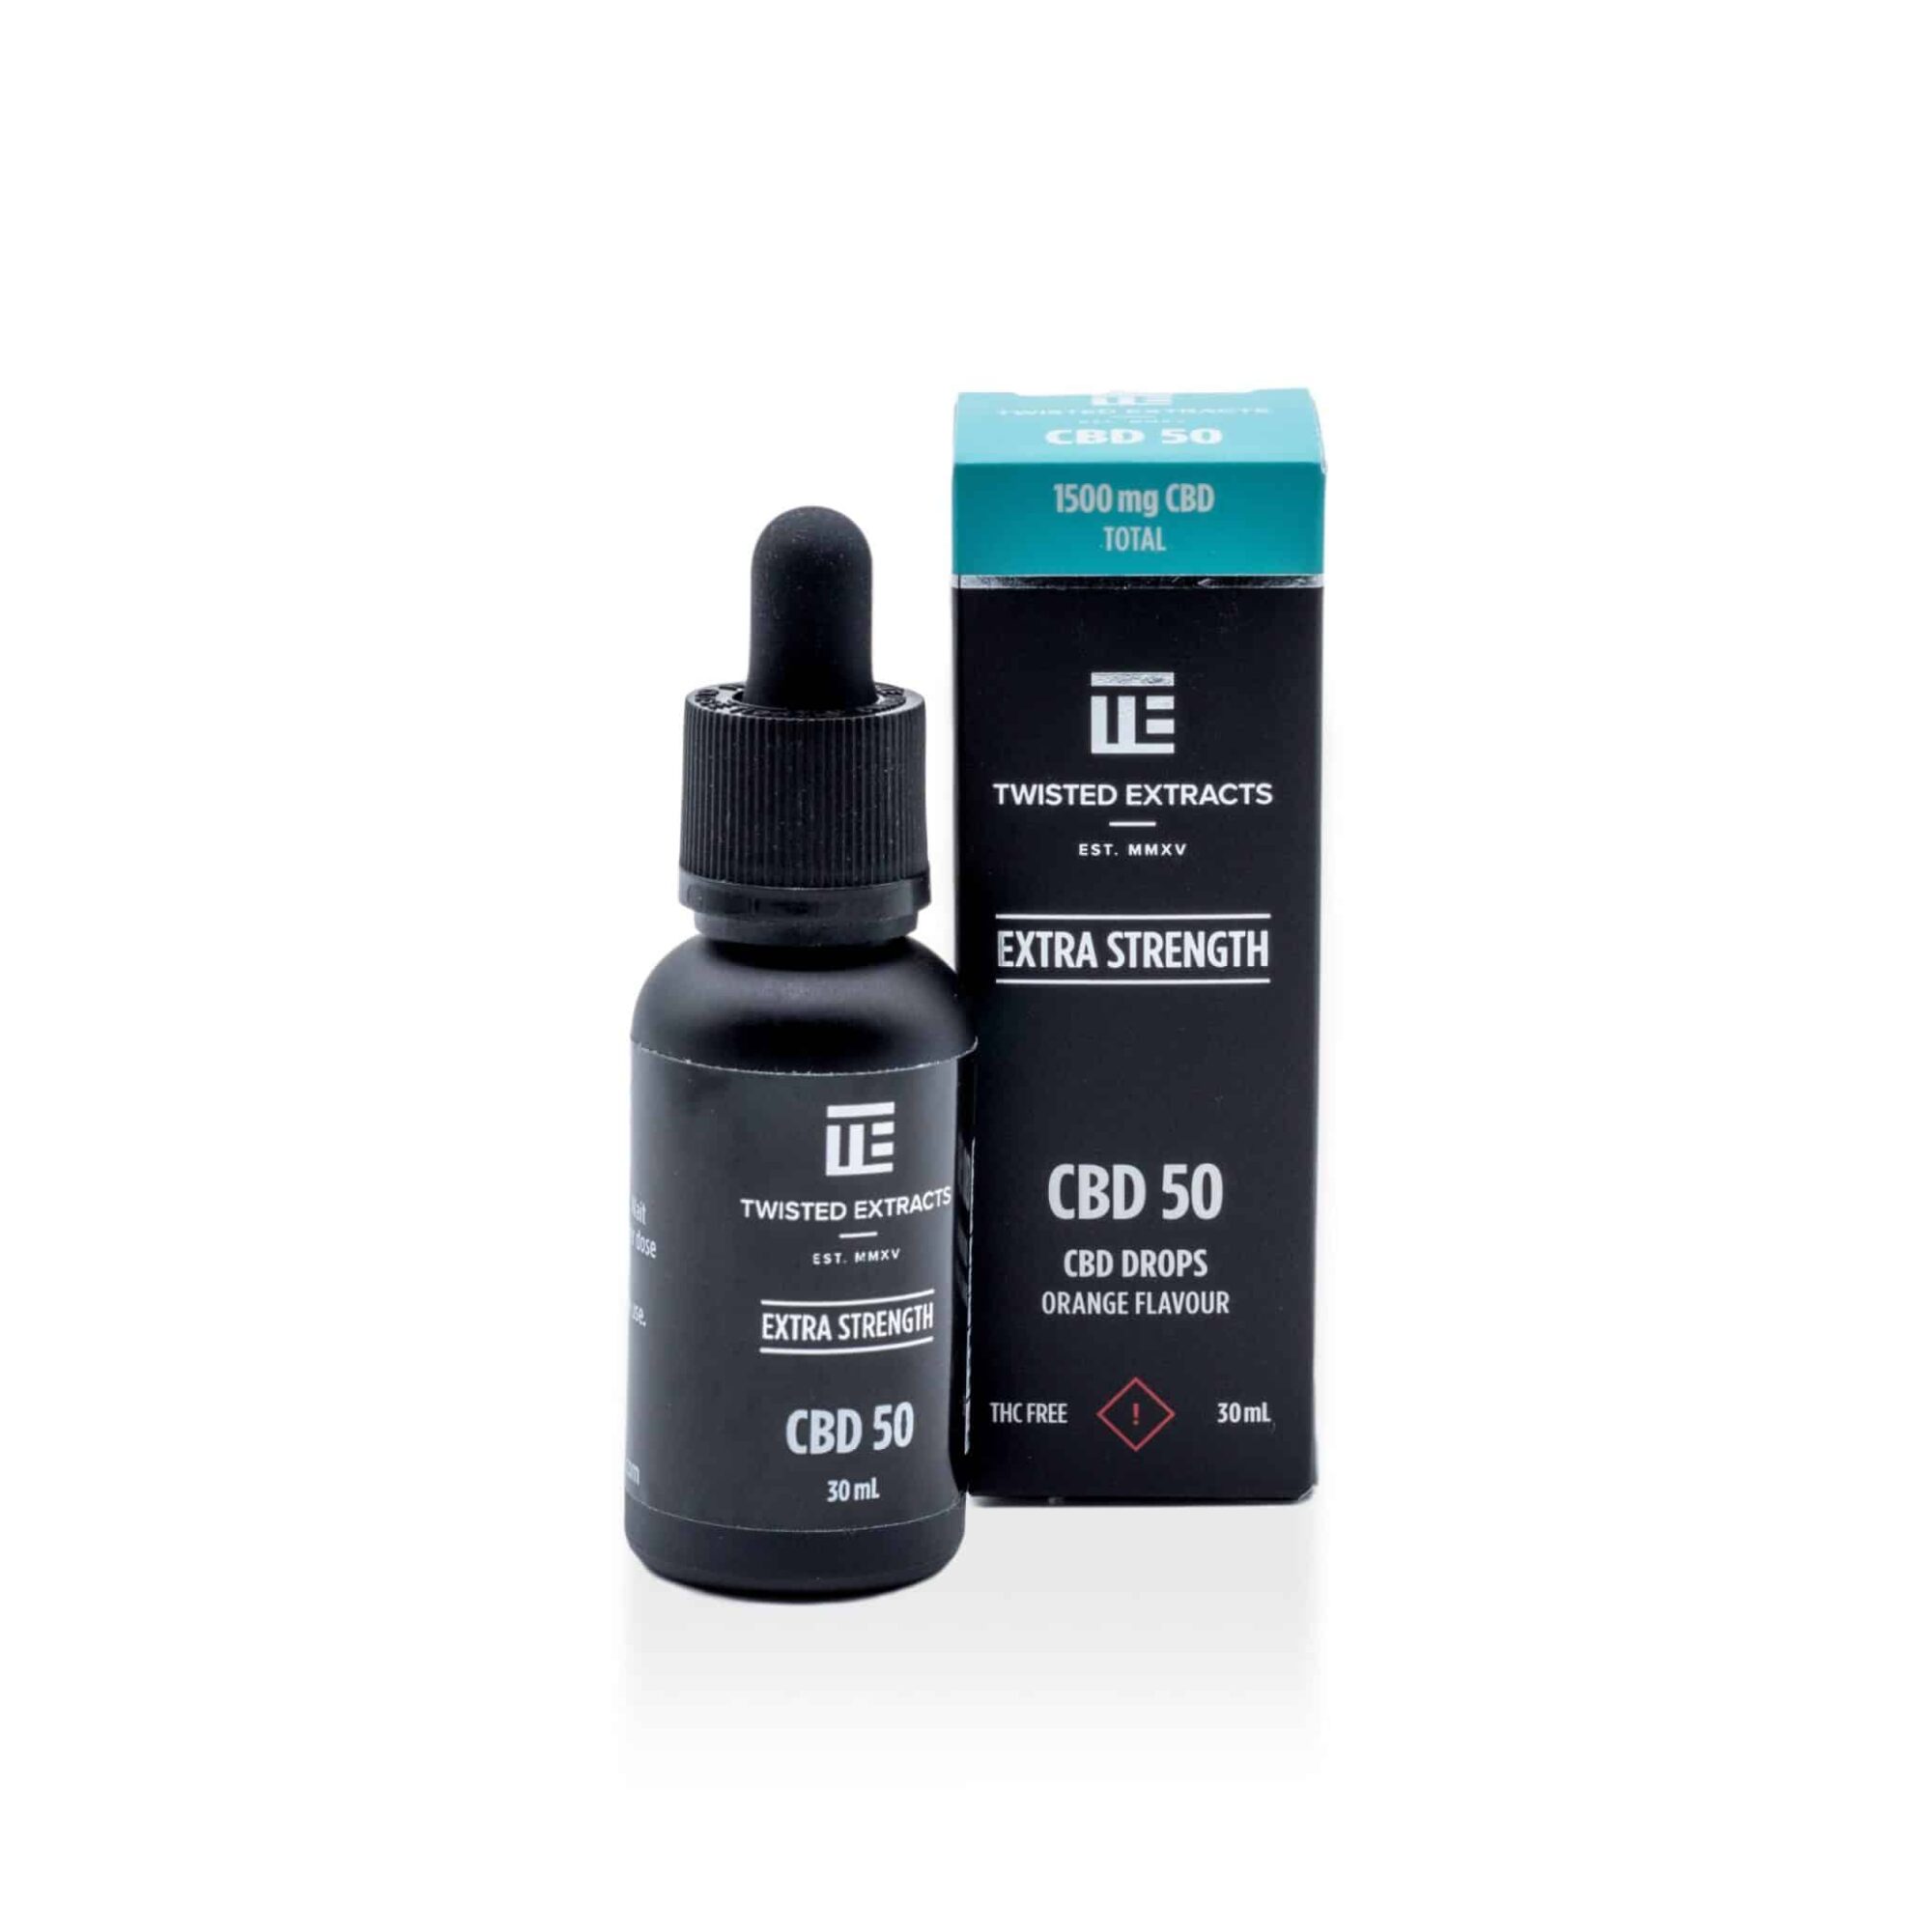 Buy Twisted Extracts 50 CBD Oil Tincture Drops 1500mg (Orange Flavour) at Wccannabis Online Shop